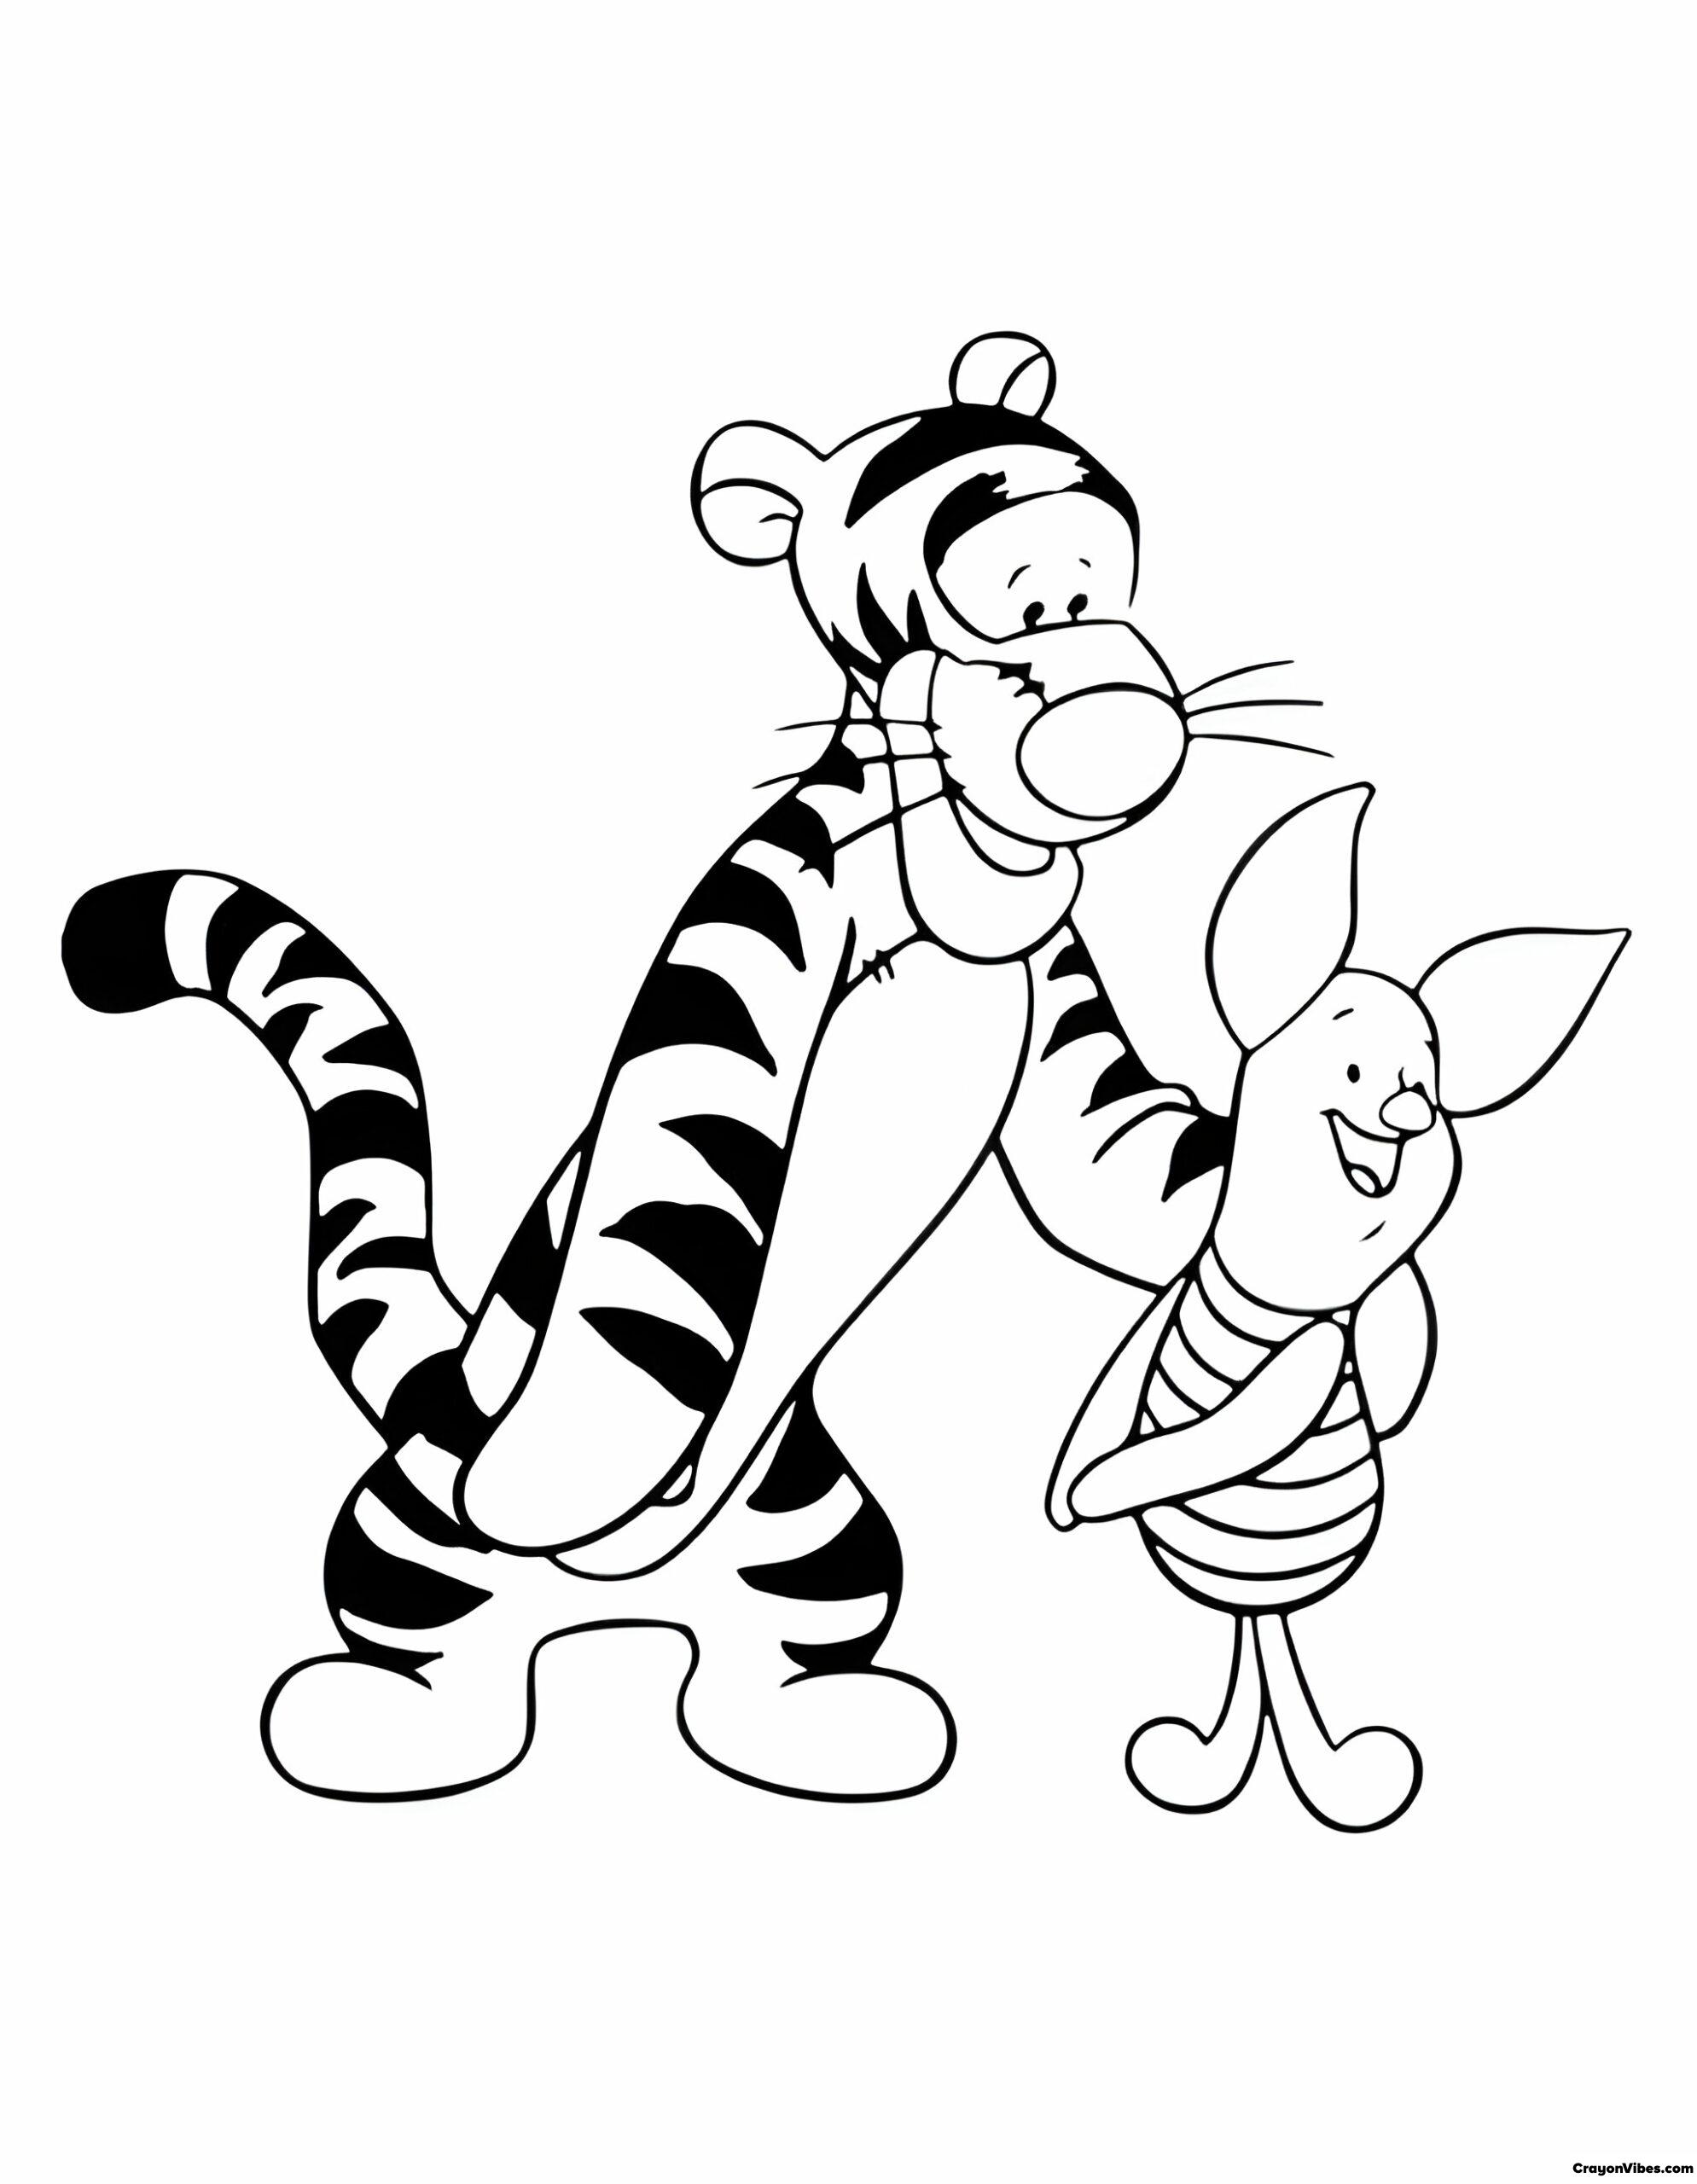 Tigger Coloring Pages Free Printable for Kids